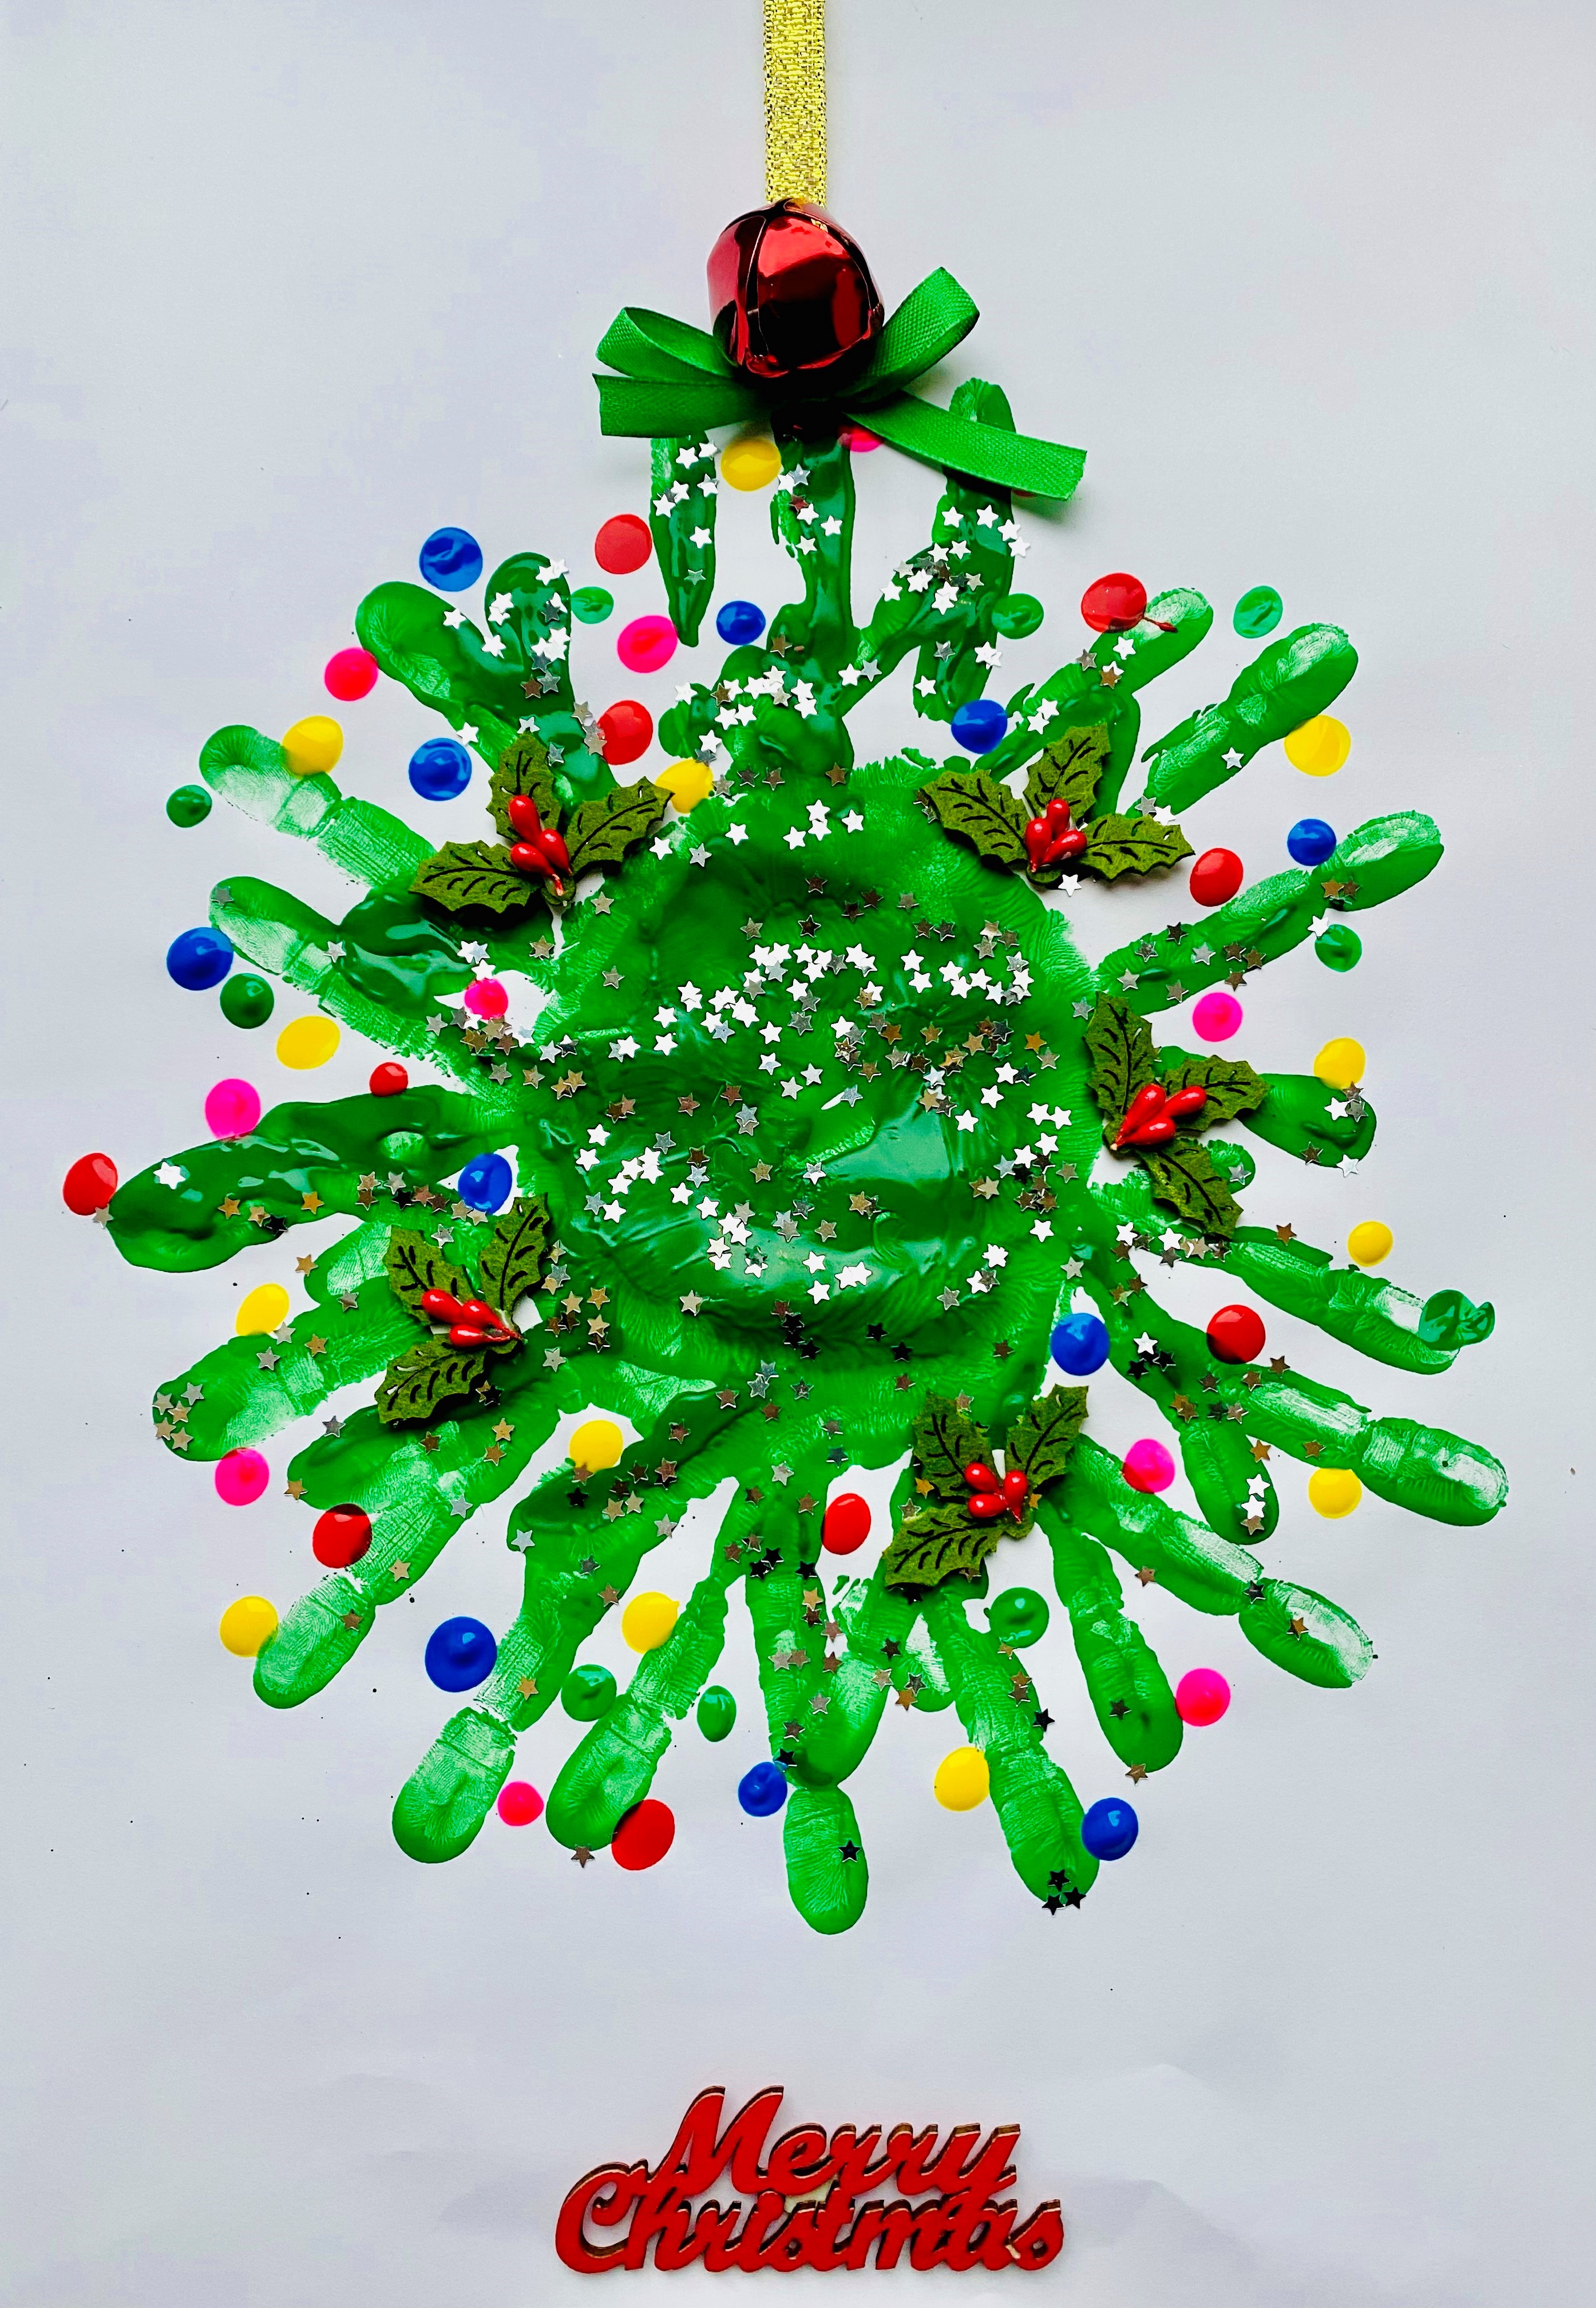 Charlie Smith's entry into our Christmas Card competition. It features a wreath made from his parents handprints, and baubles in different colours.